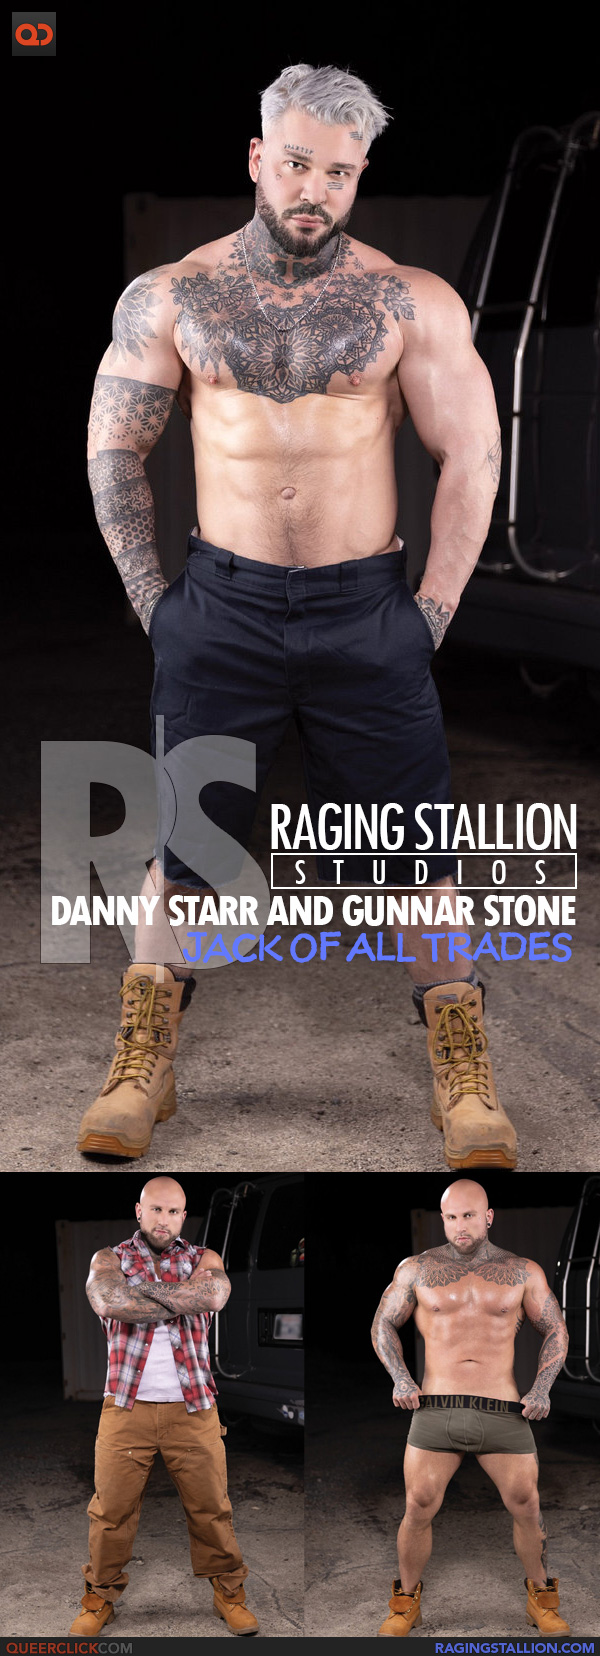 Raging Stallion: Danny Starr and Gunnar Stone - Jack Of All Trades 